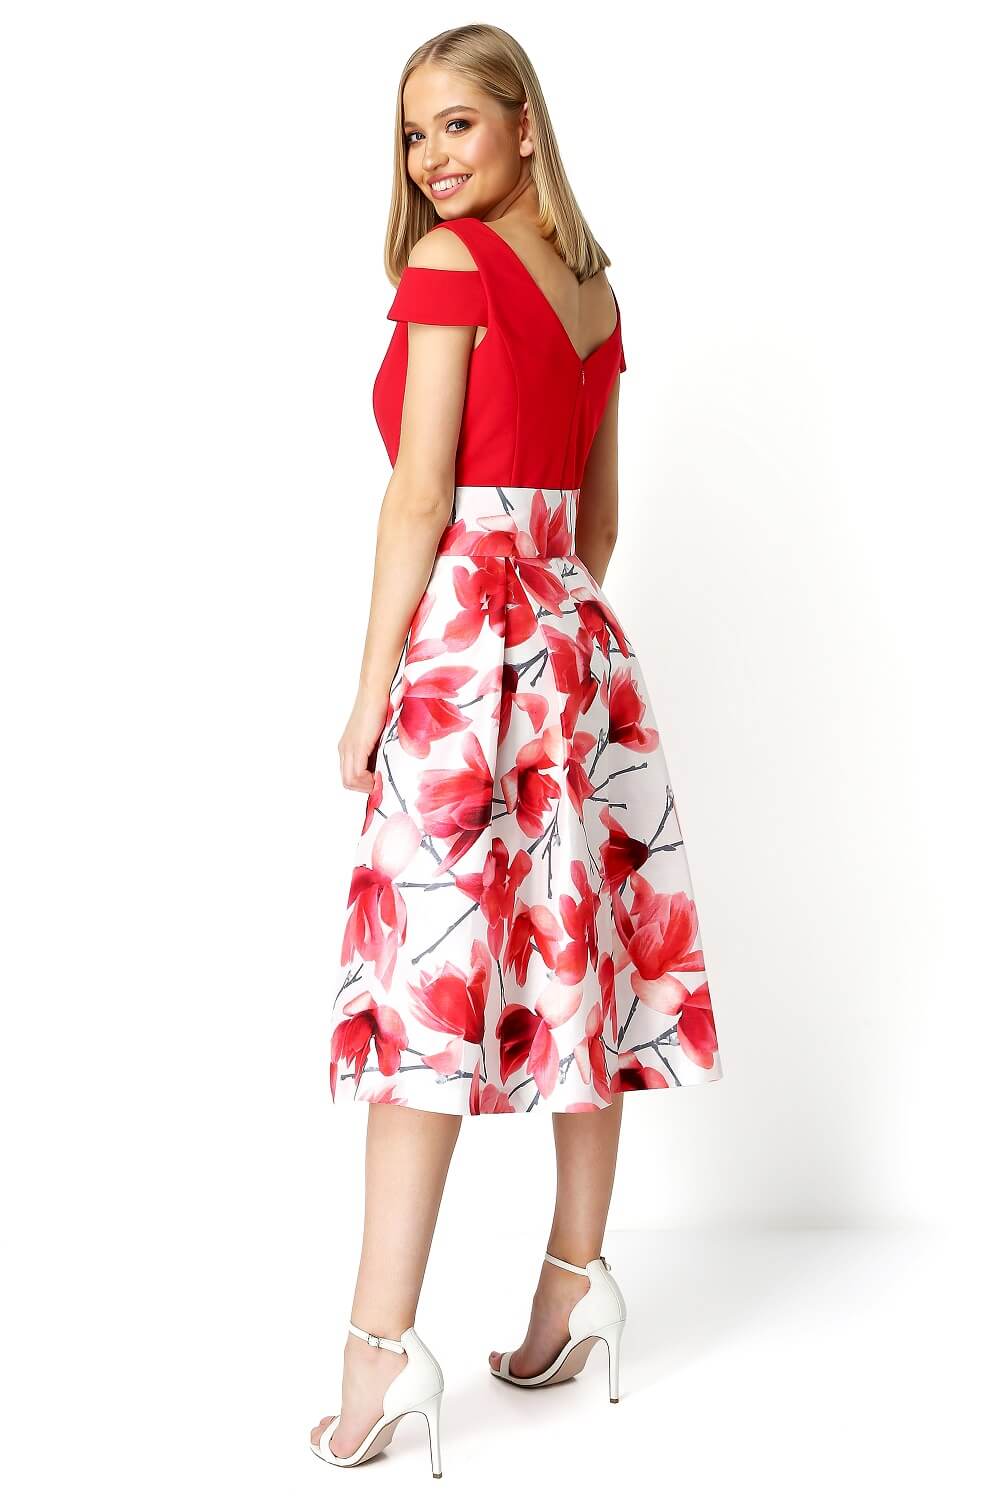 PINK Floral Print Fit and Flare Midi Dress, Image 3 of 4